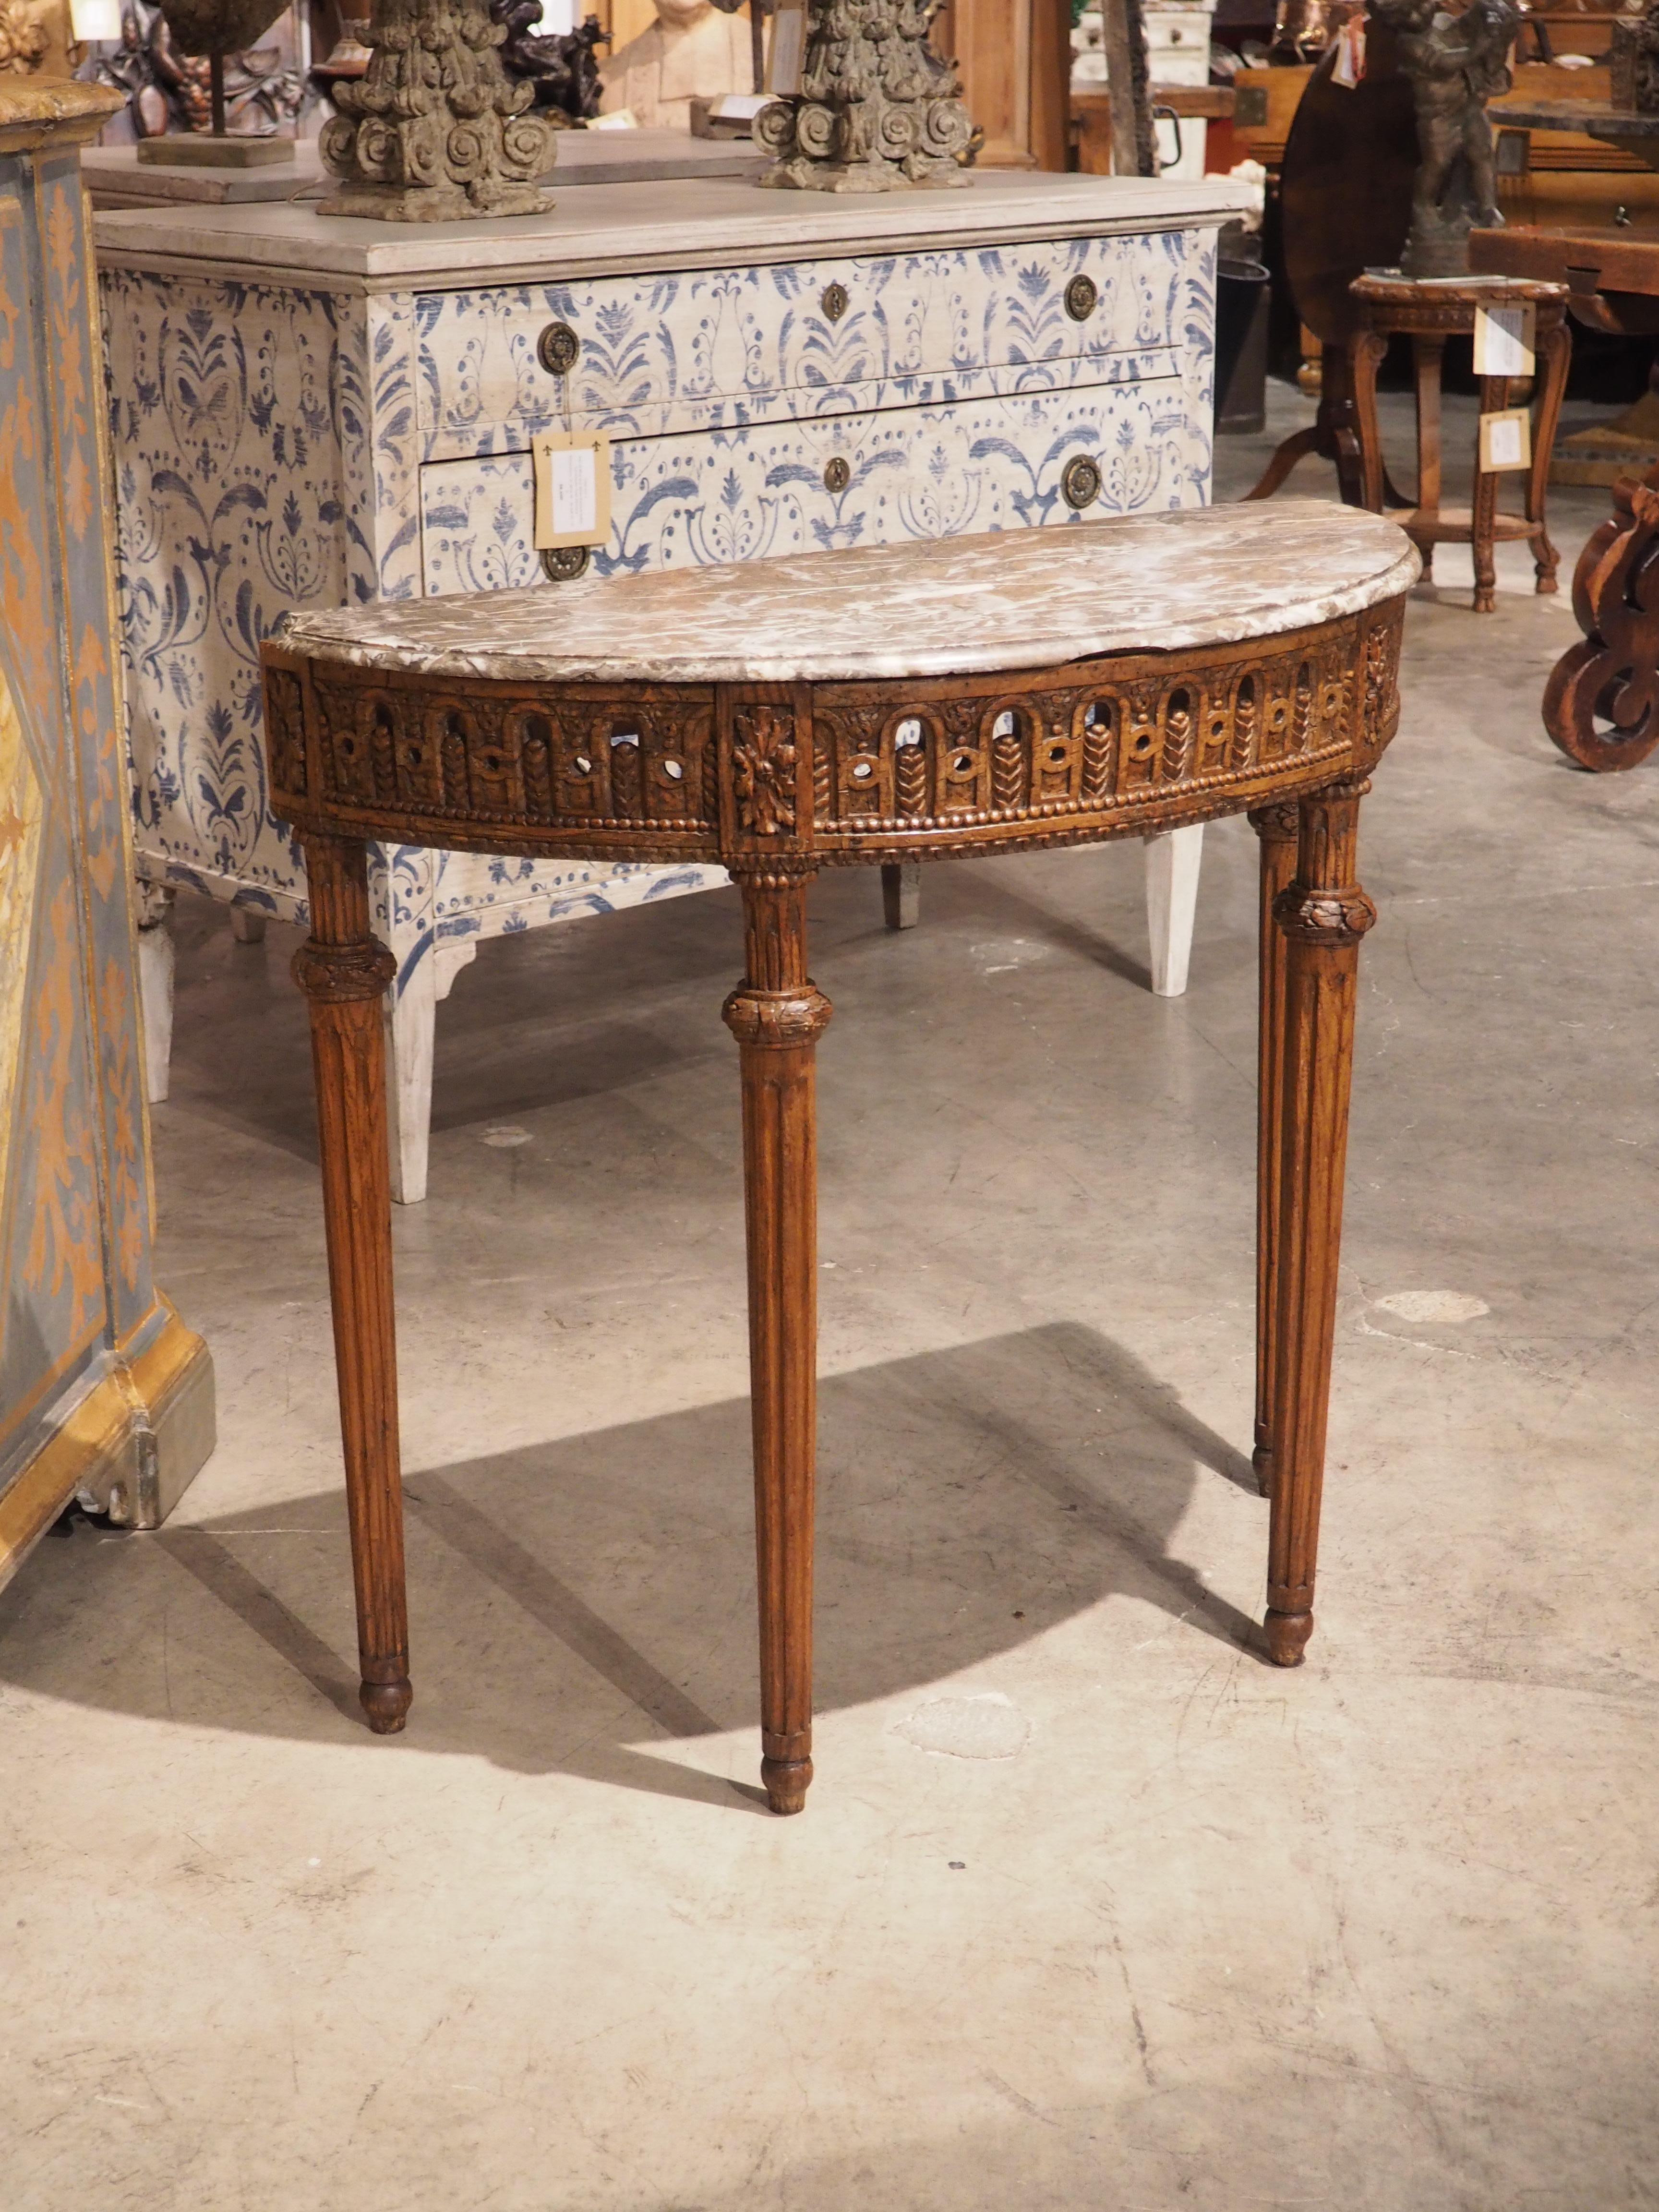 Period French Louis XVI Carved Oak and Marble Demi Lune Console Table, C. 1785 For Sale 4